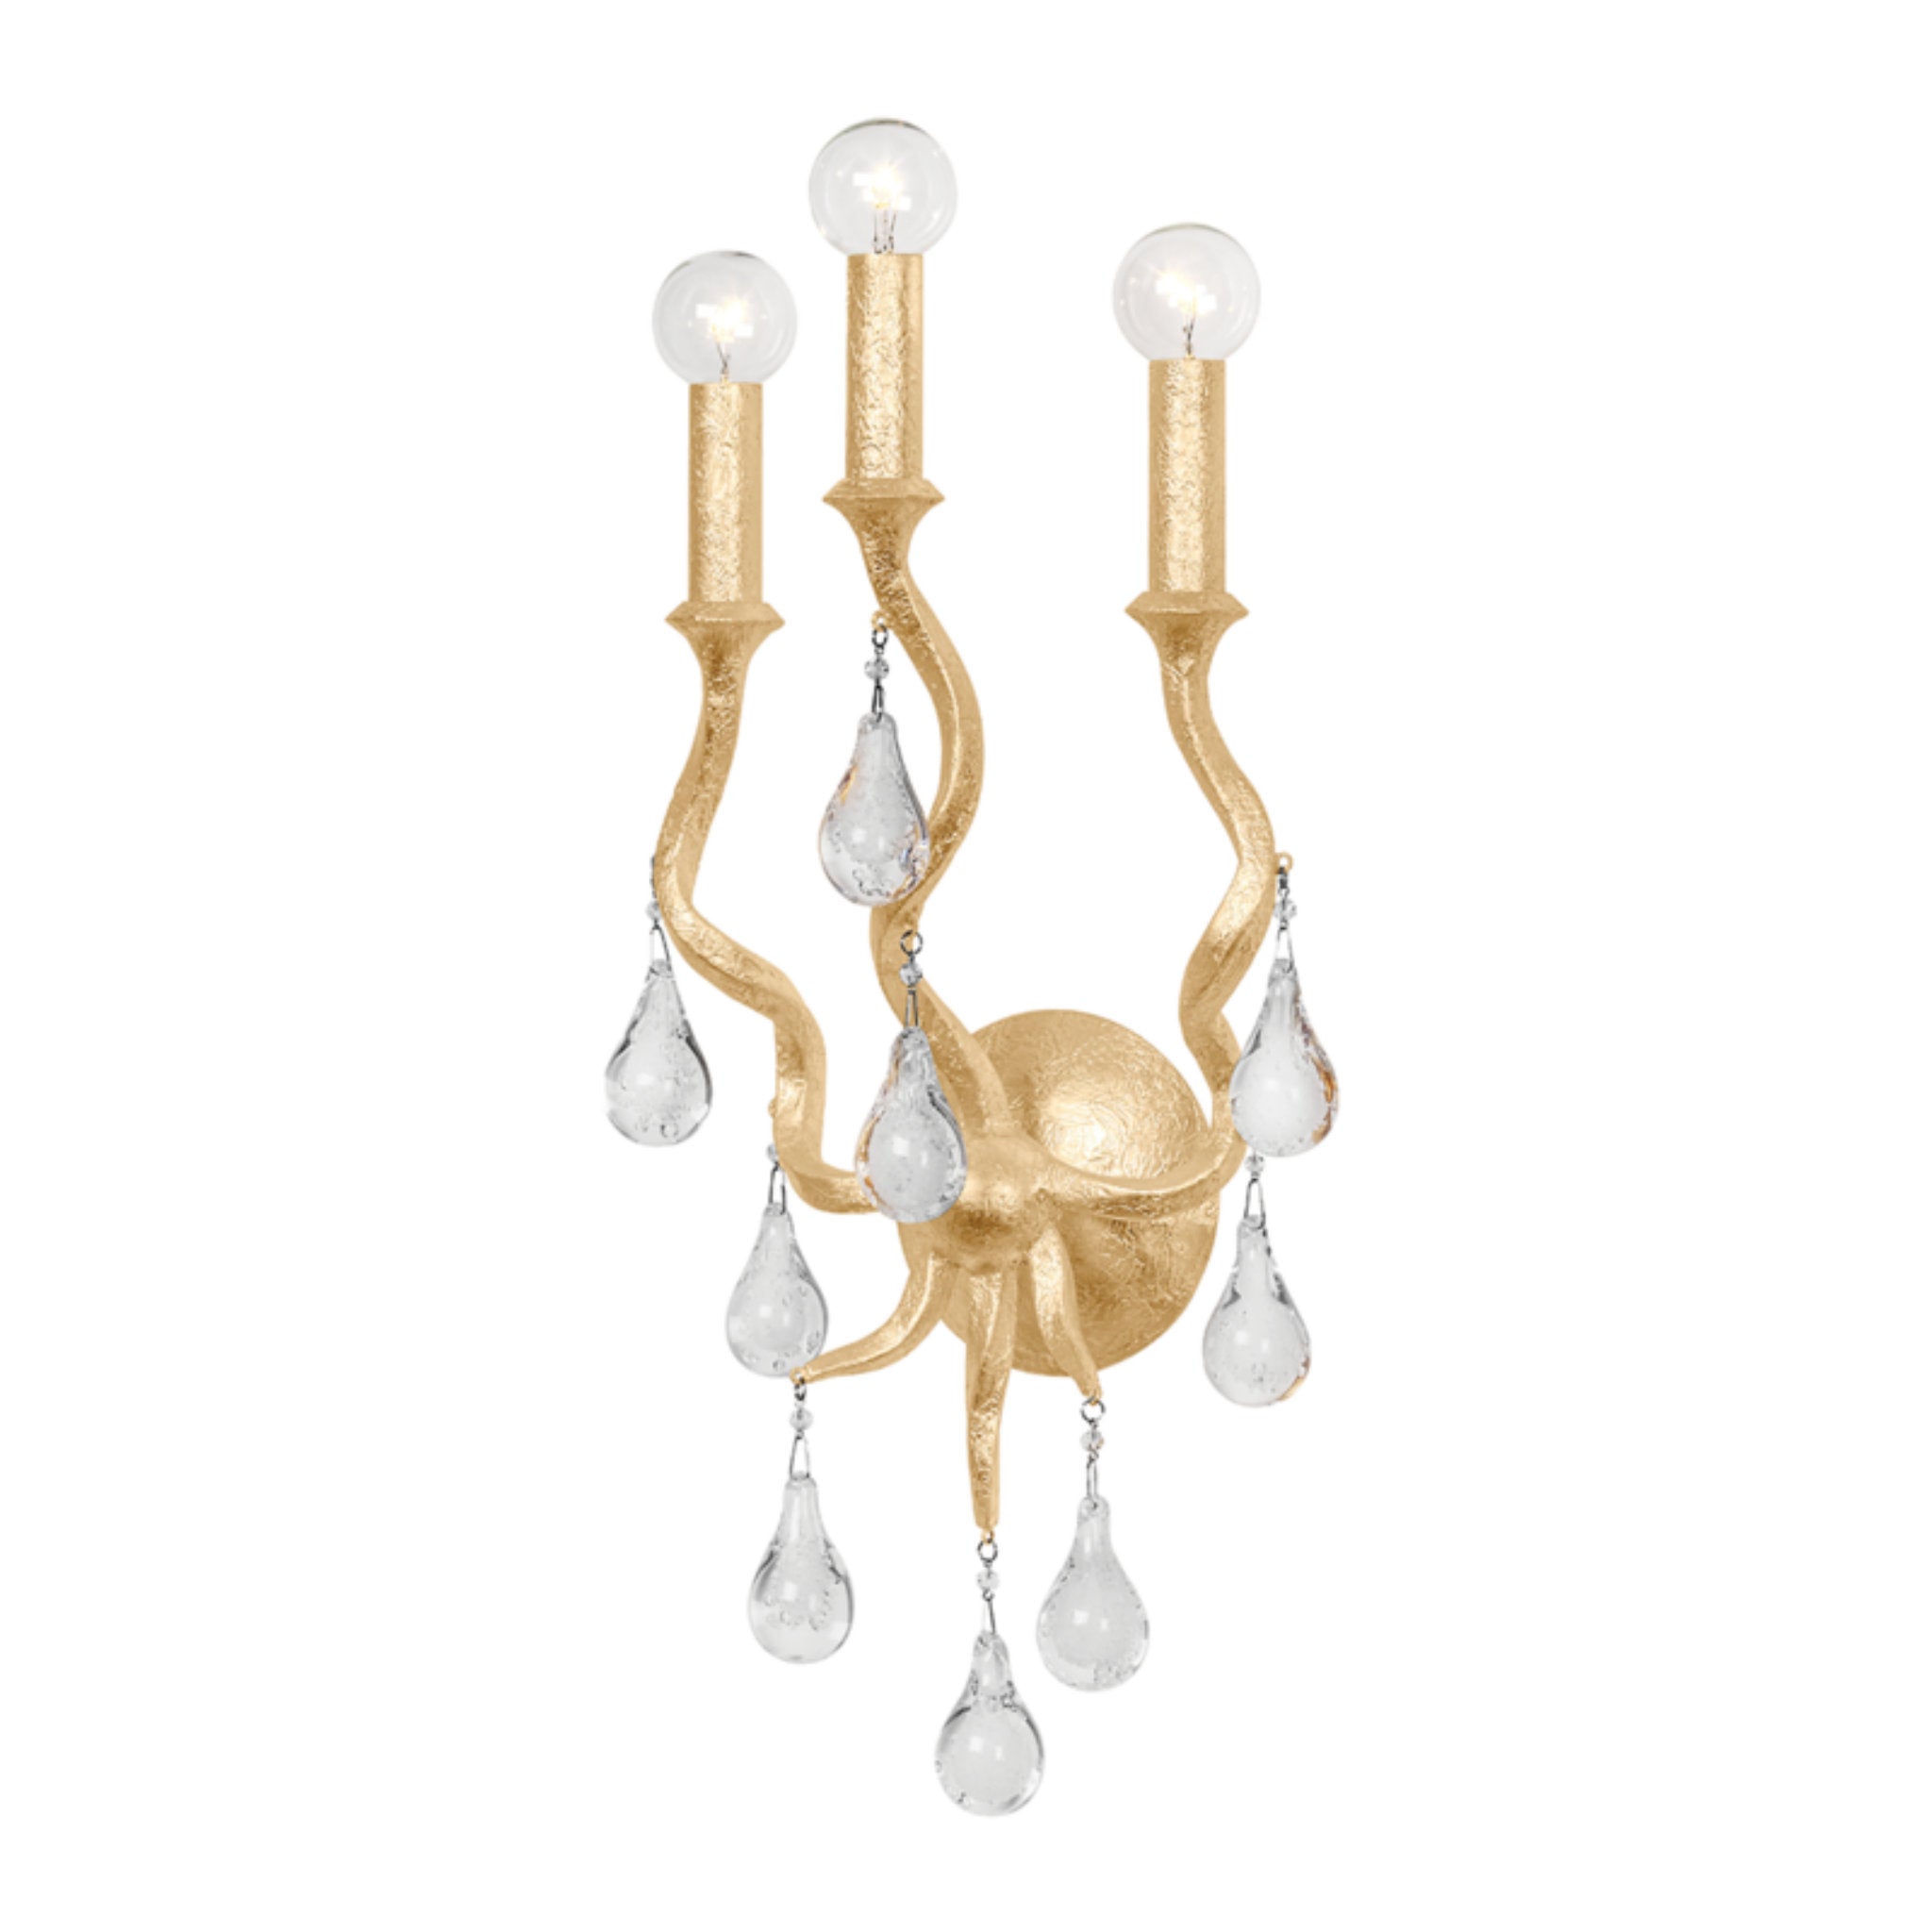 Aveline 3 Light Wall Sconce in Gold Leaf